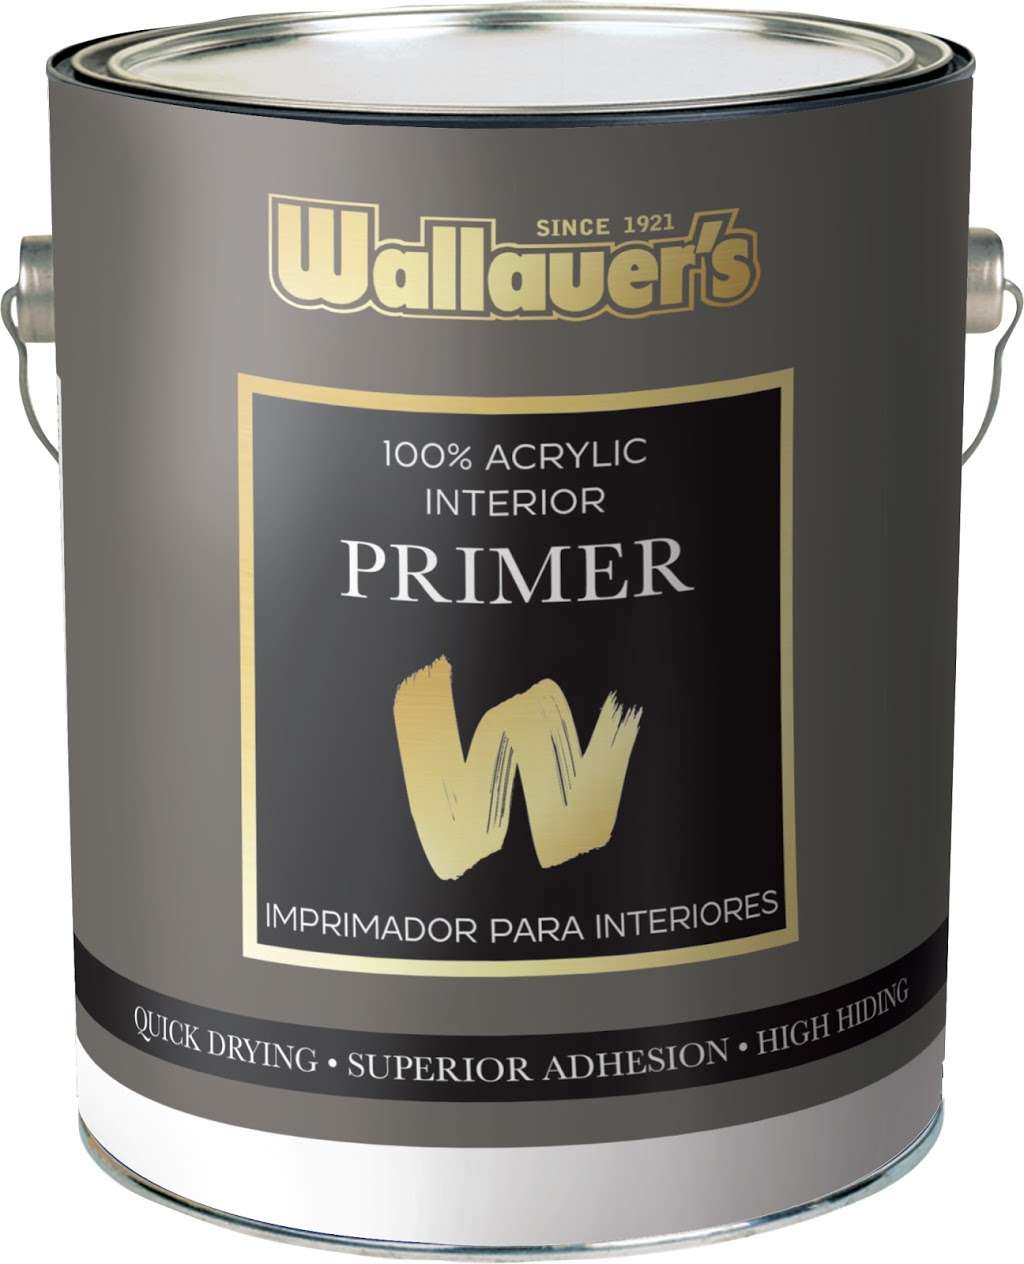 Wallauer Paint and Design | 621 Tuckahoe Rd, Yonkers, NY 10710 | Phone: (914) 779-6767